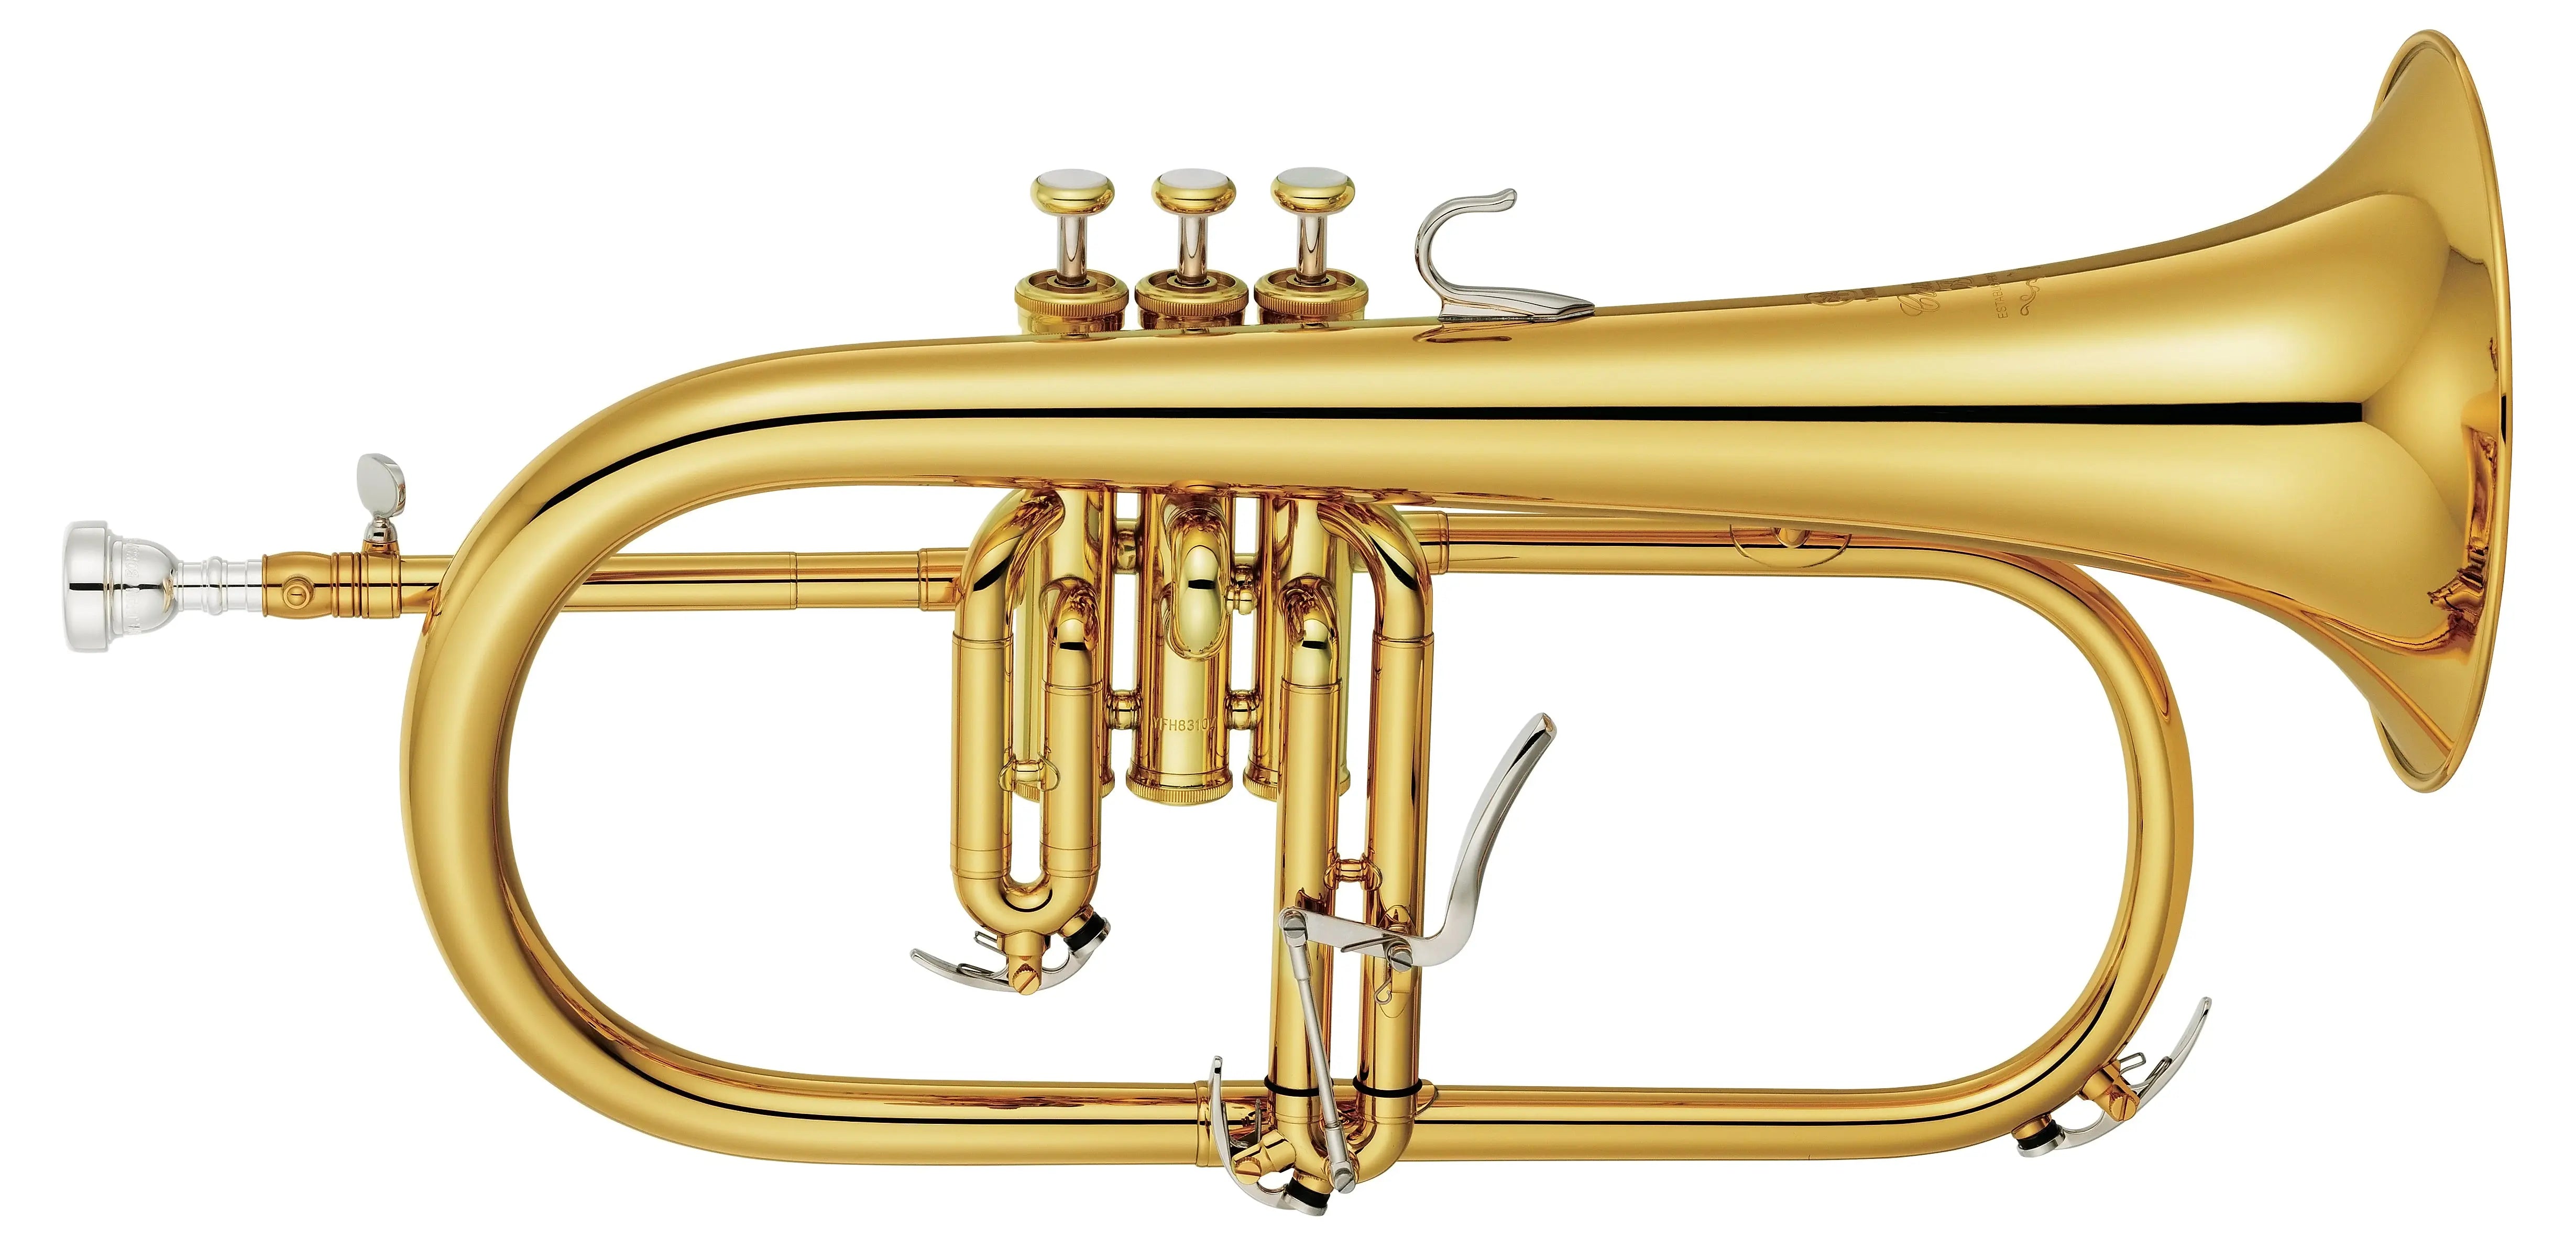 High-Grade Student Flugelhorn with mouthpieces for sale, perfect for expressing emotion and joy in music